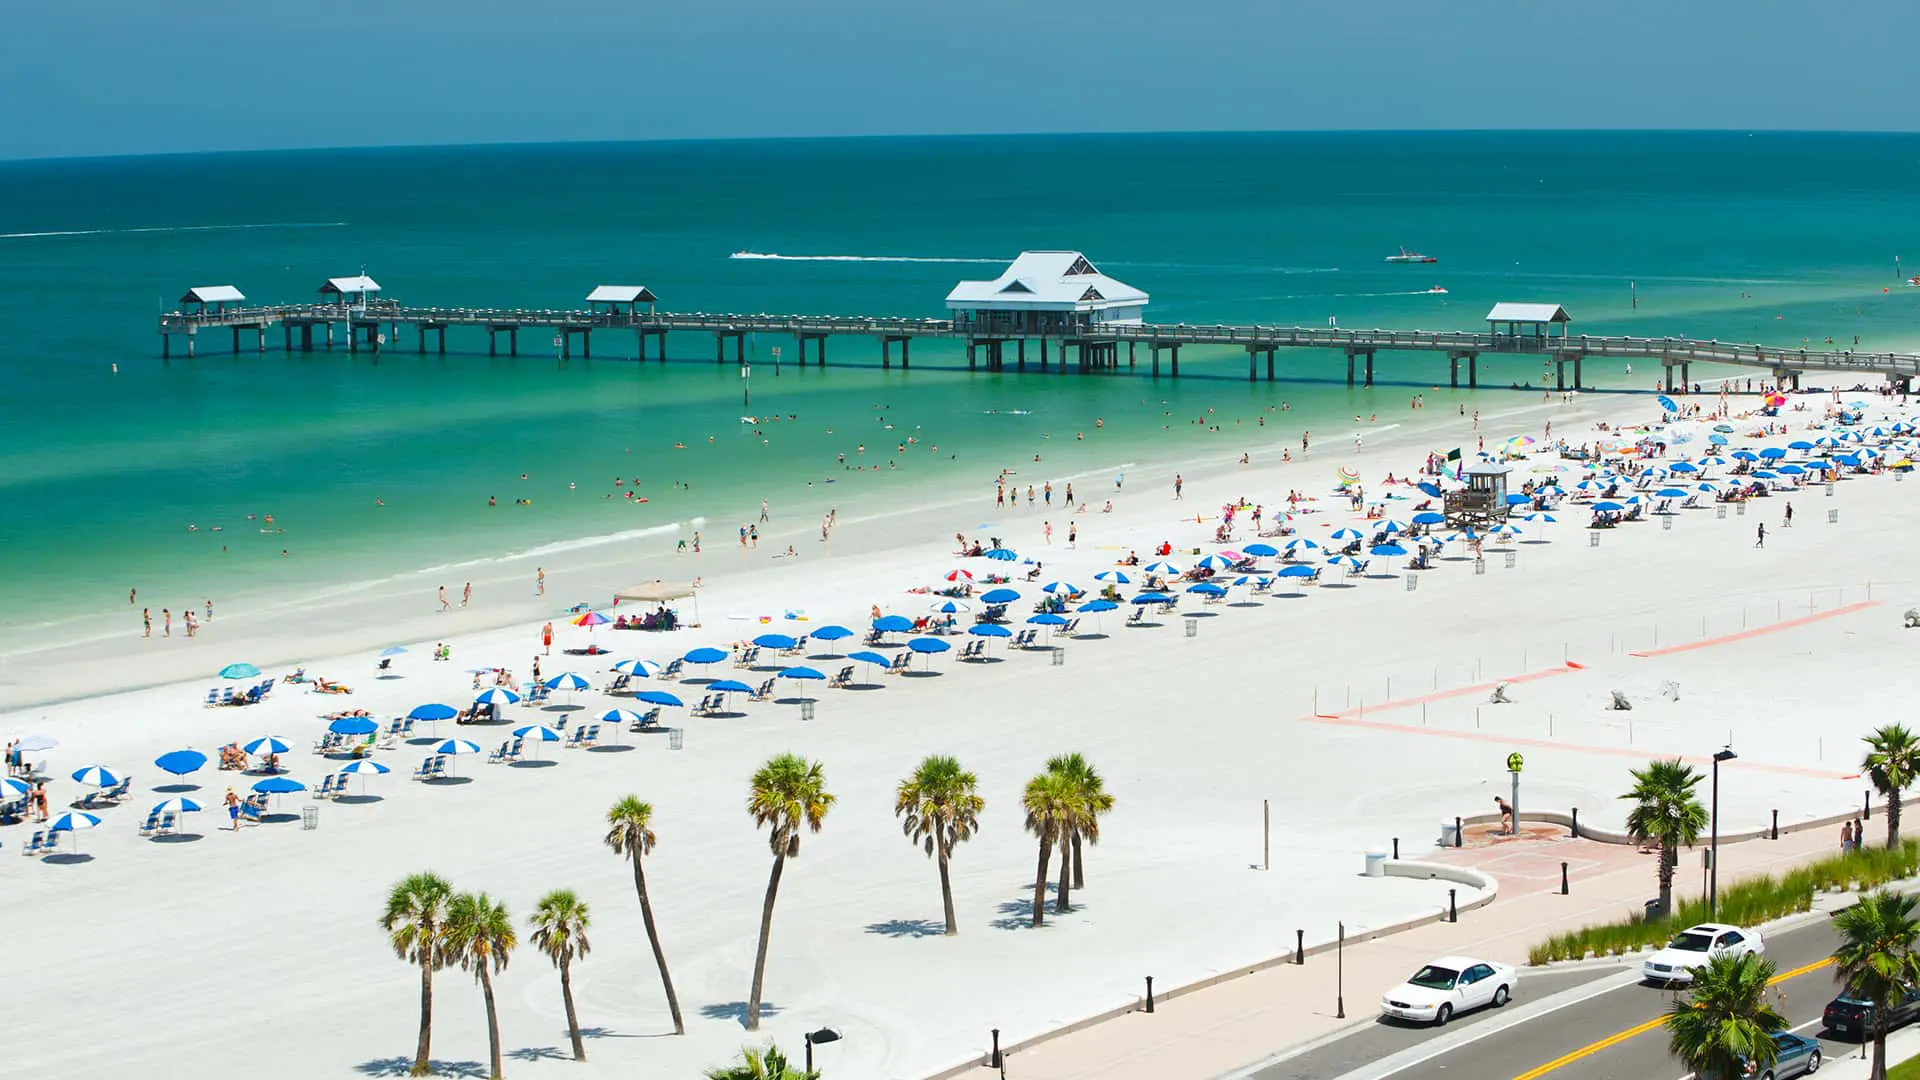 Day Trip to Clearwater Beach with Seaside Lunch